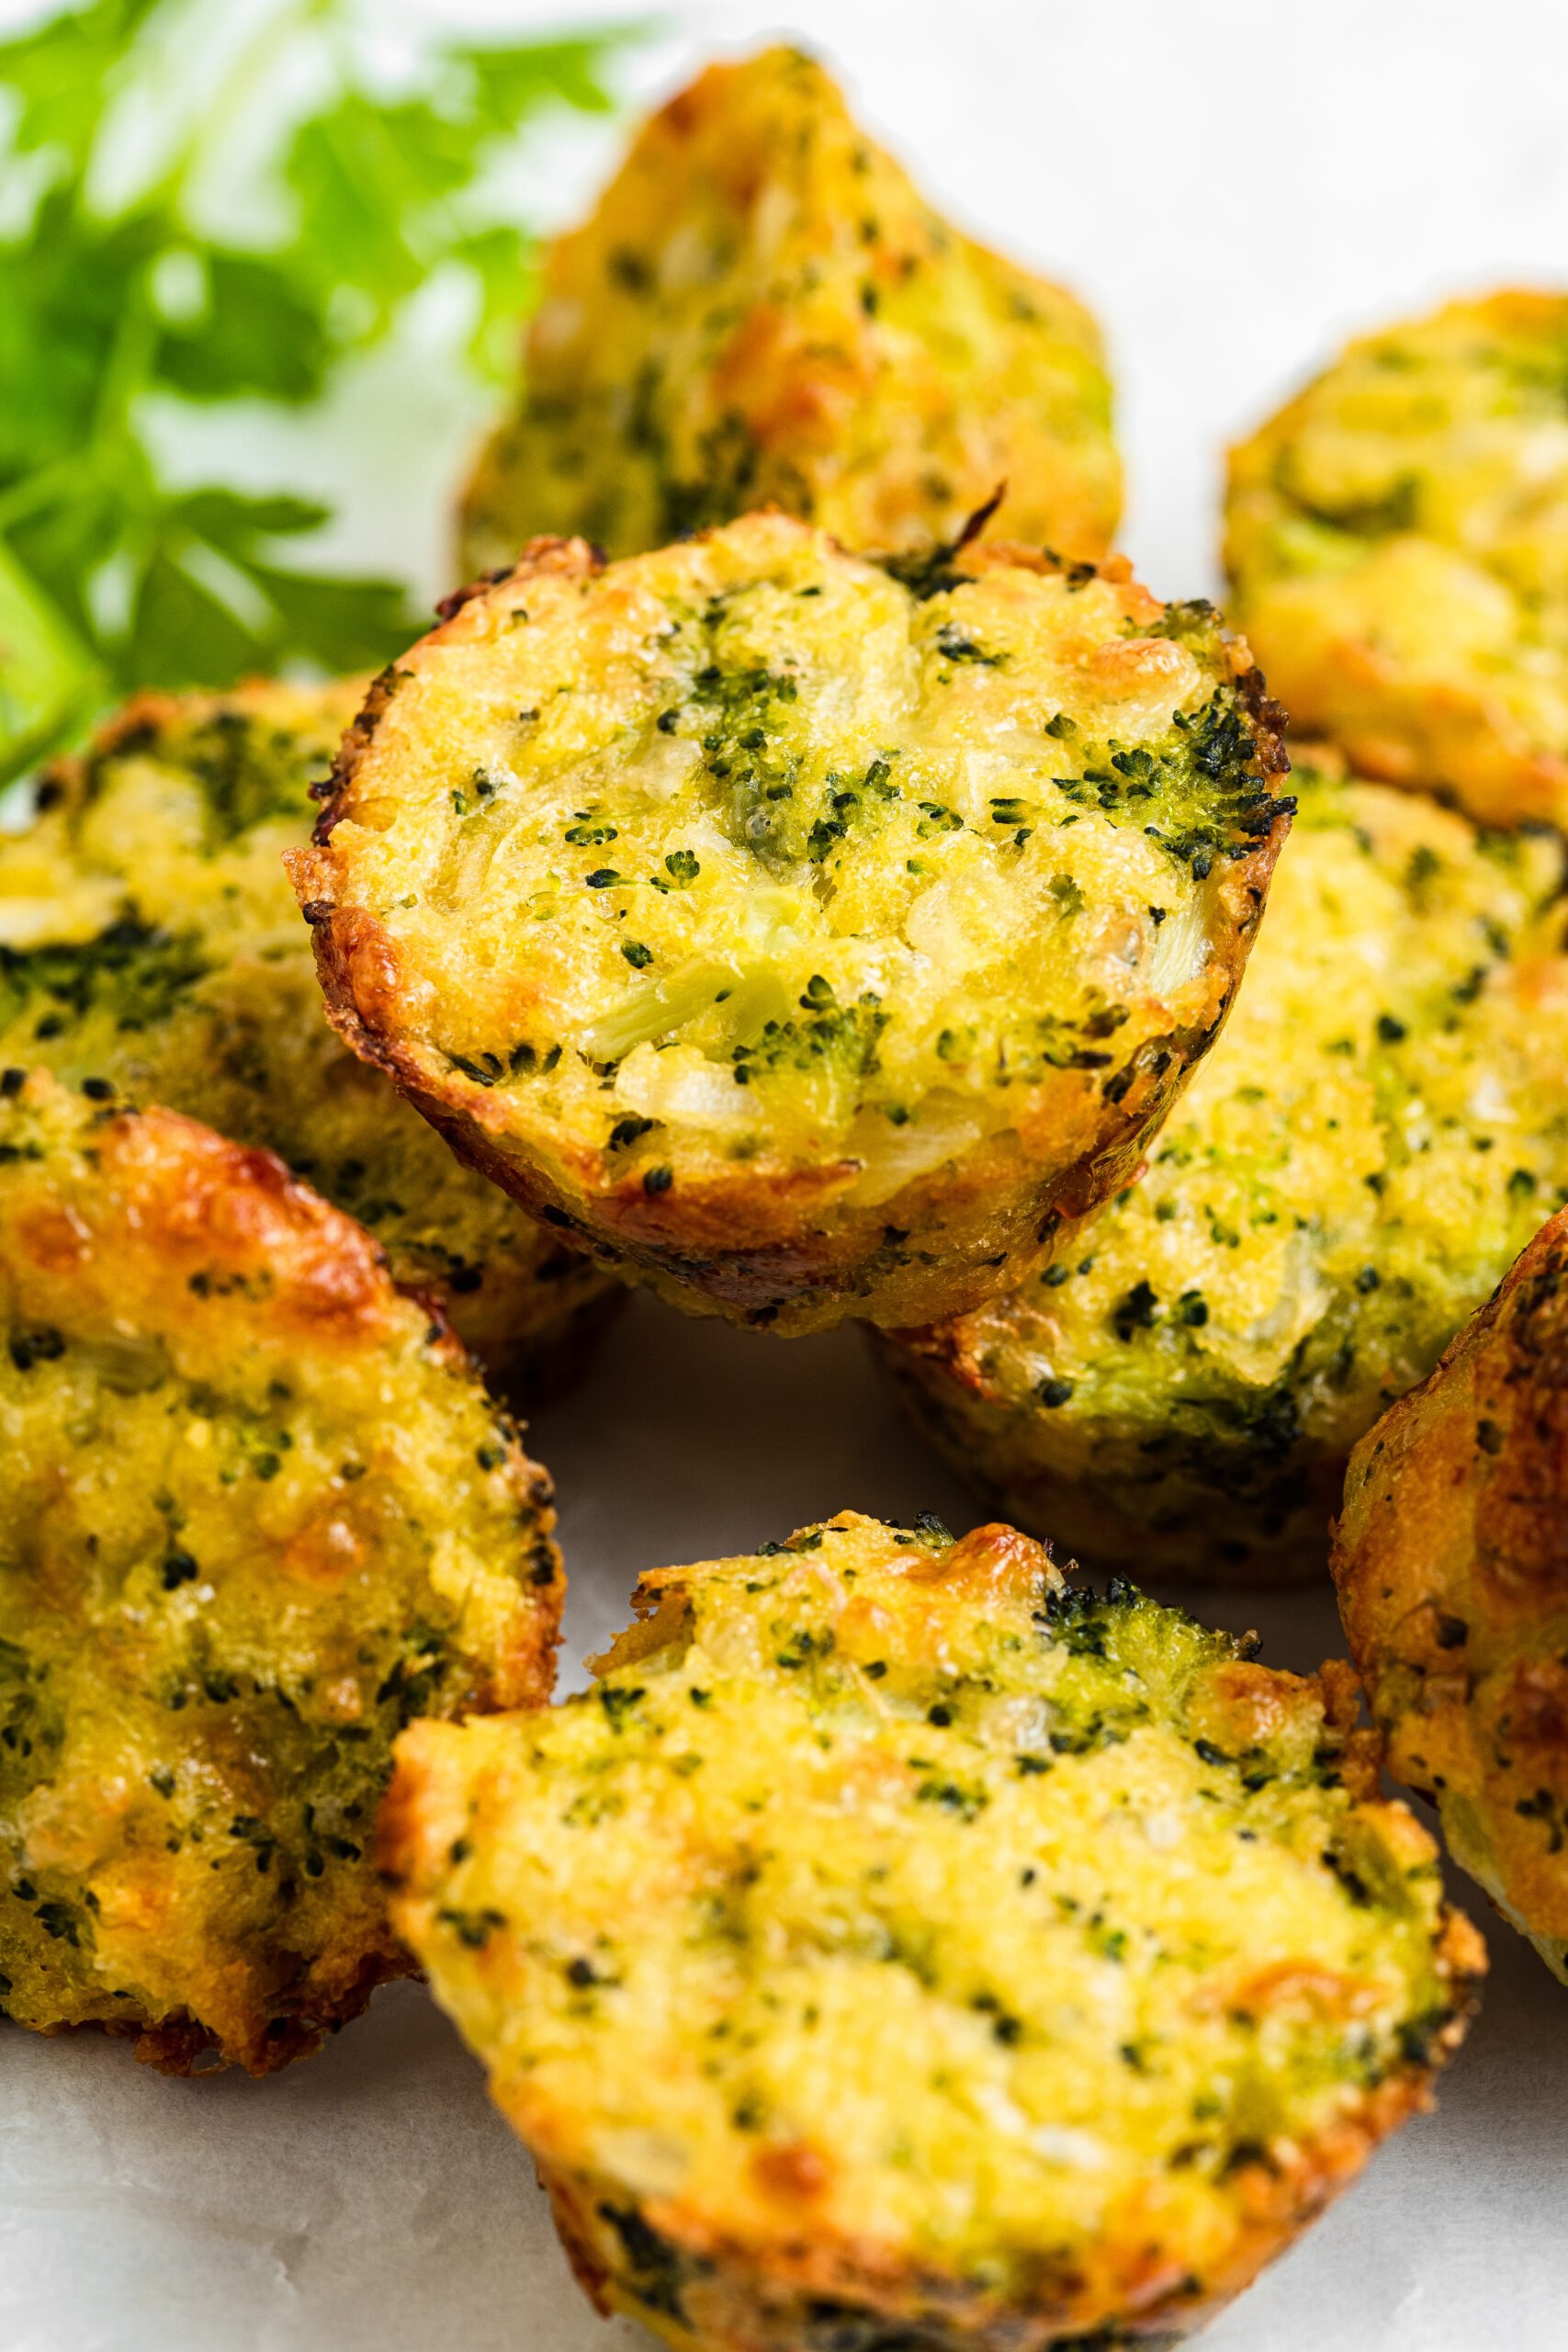 Broccoli and cheese bites fresh out of the oven